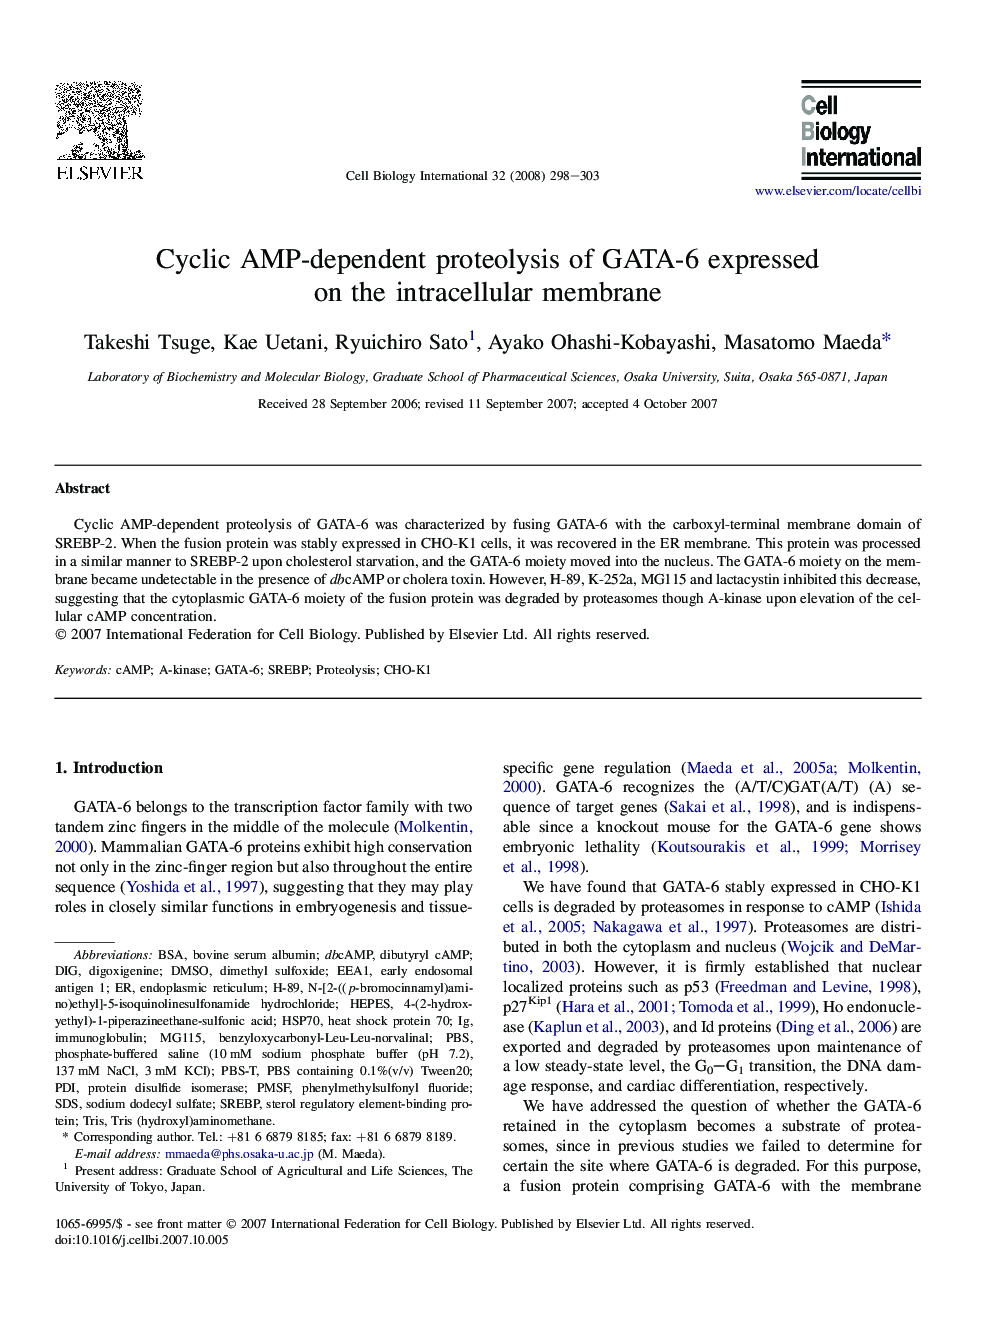 Cyclic AMP-dependent proteolysis of GATA-6 expressed on the intracellular membrane